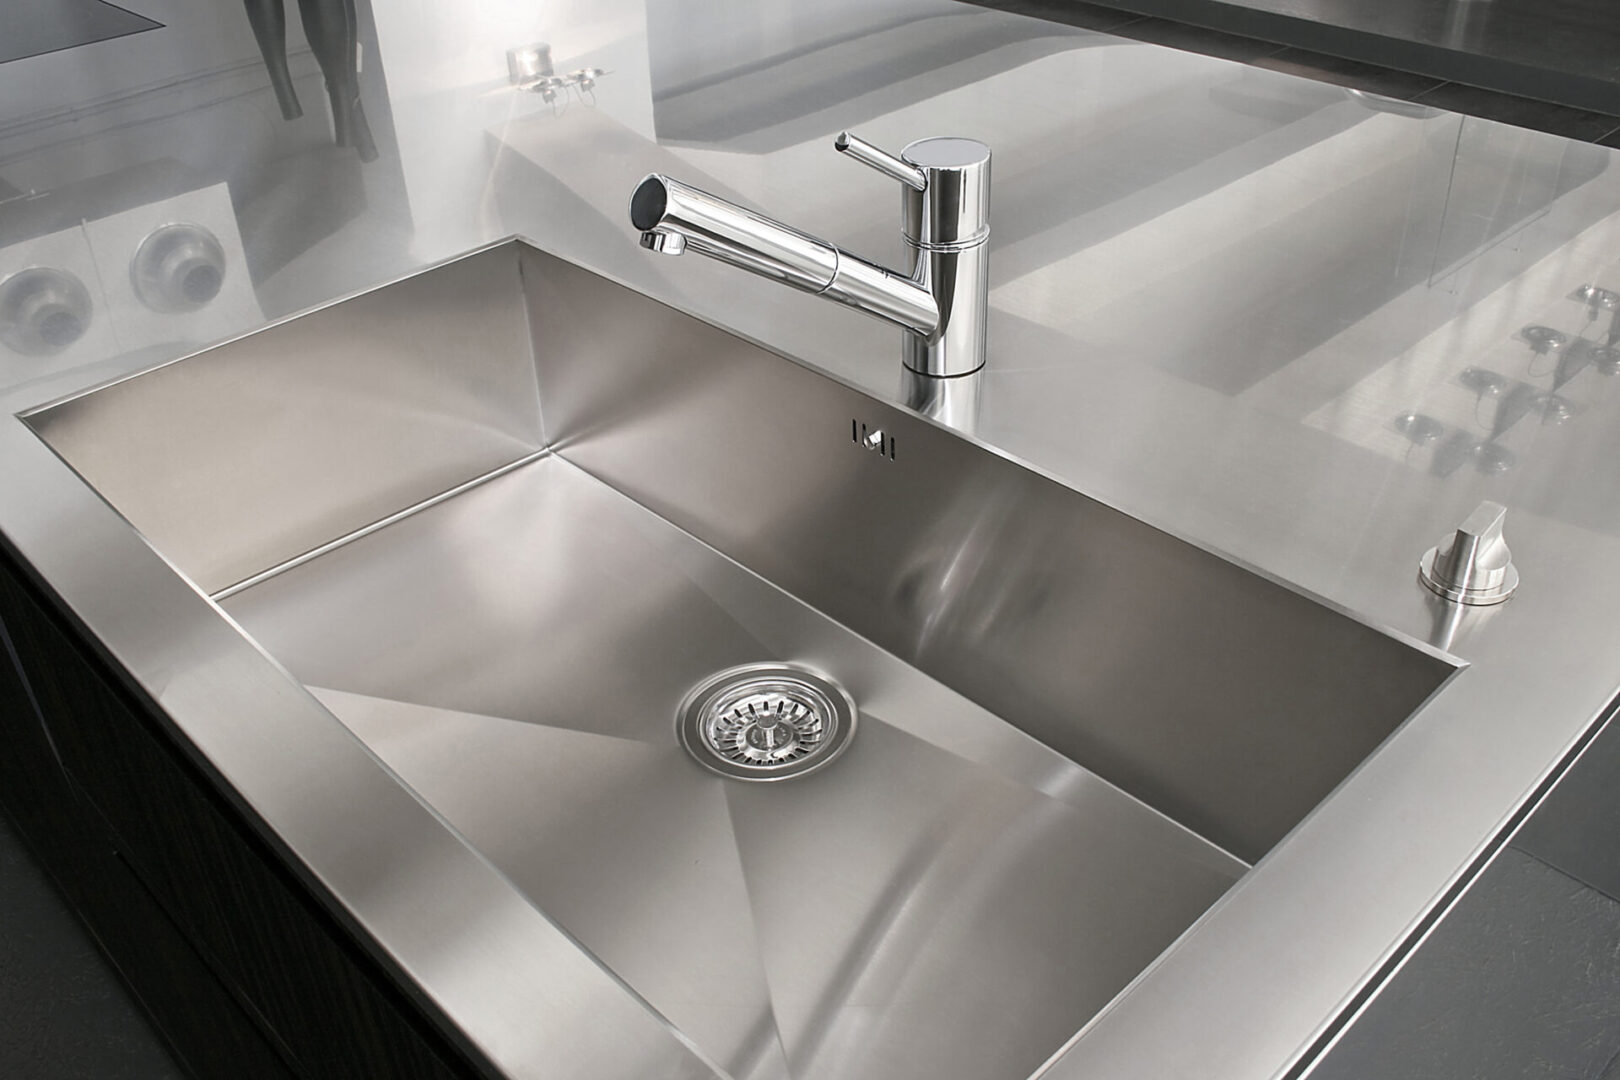 A stainless steel sink with a chrome faucet.